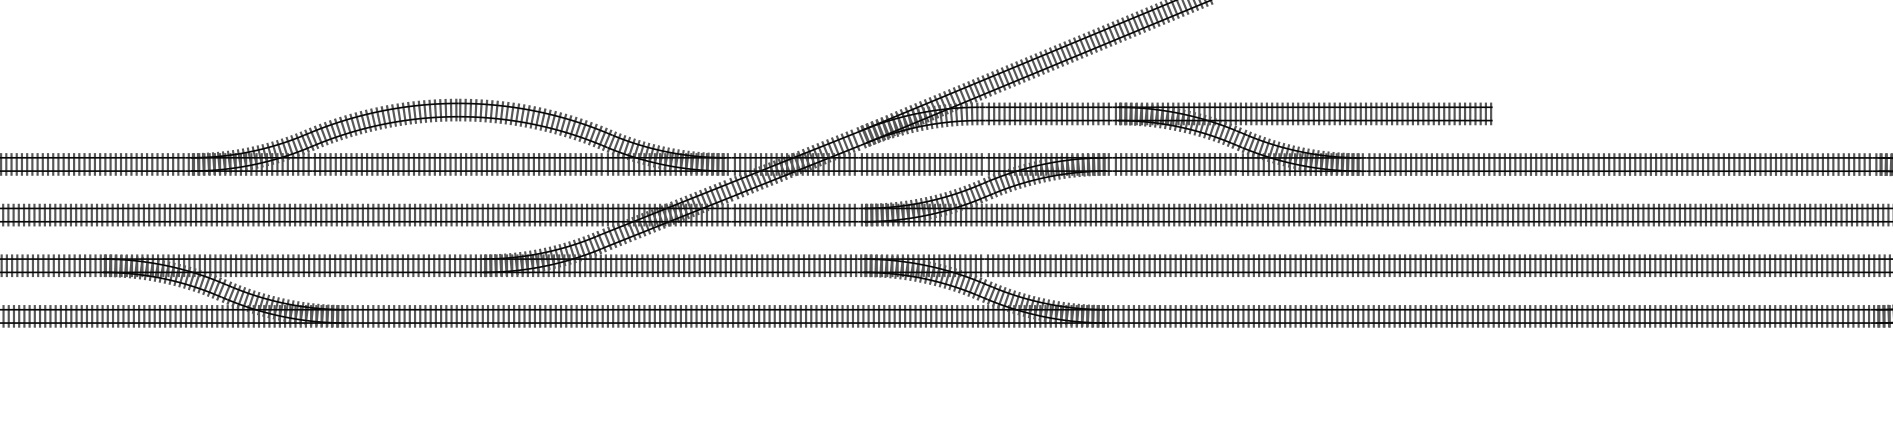 Simplified - Track Sleepers - Southern end of Station.jpg